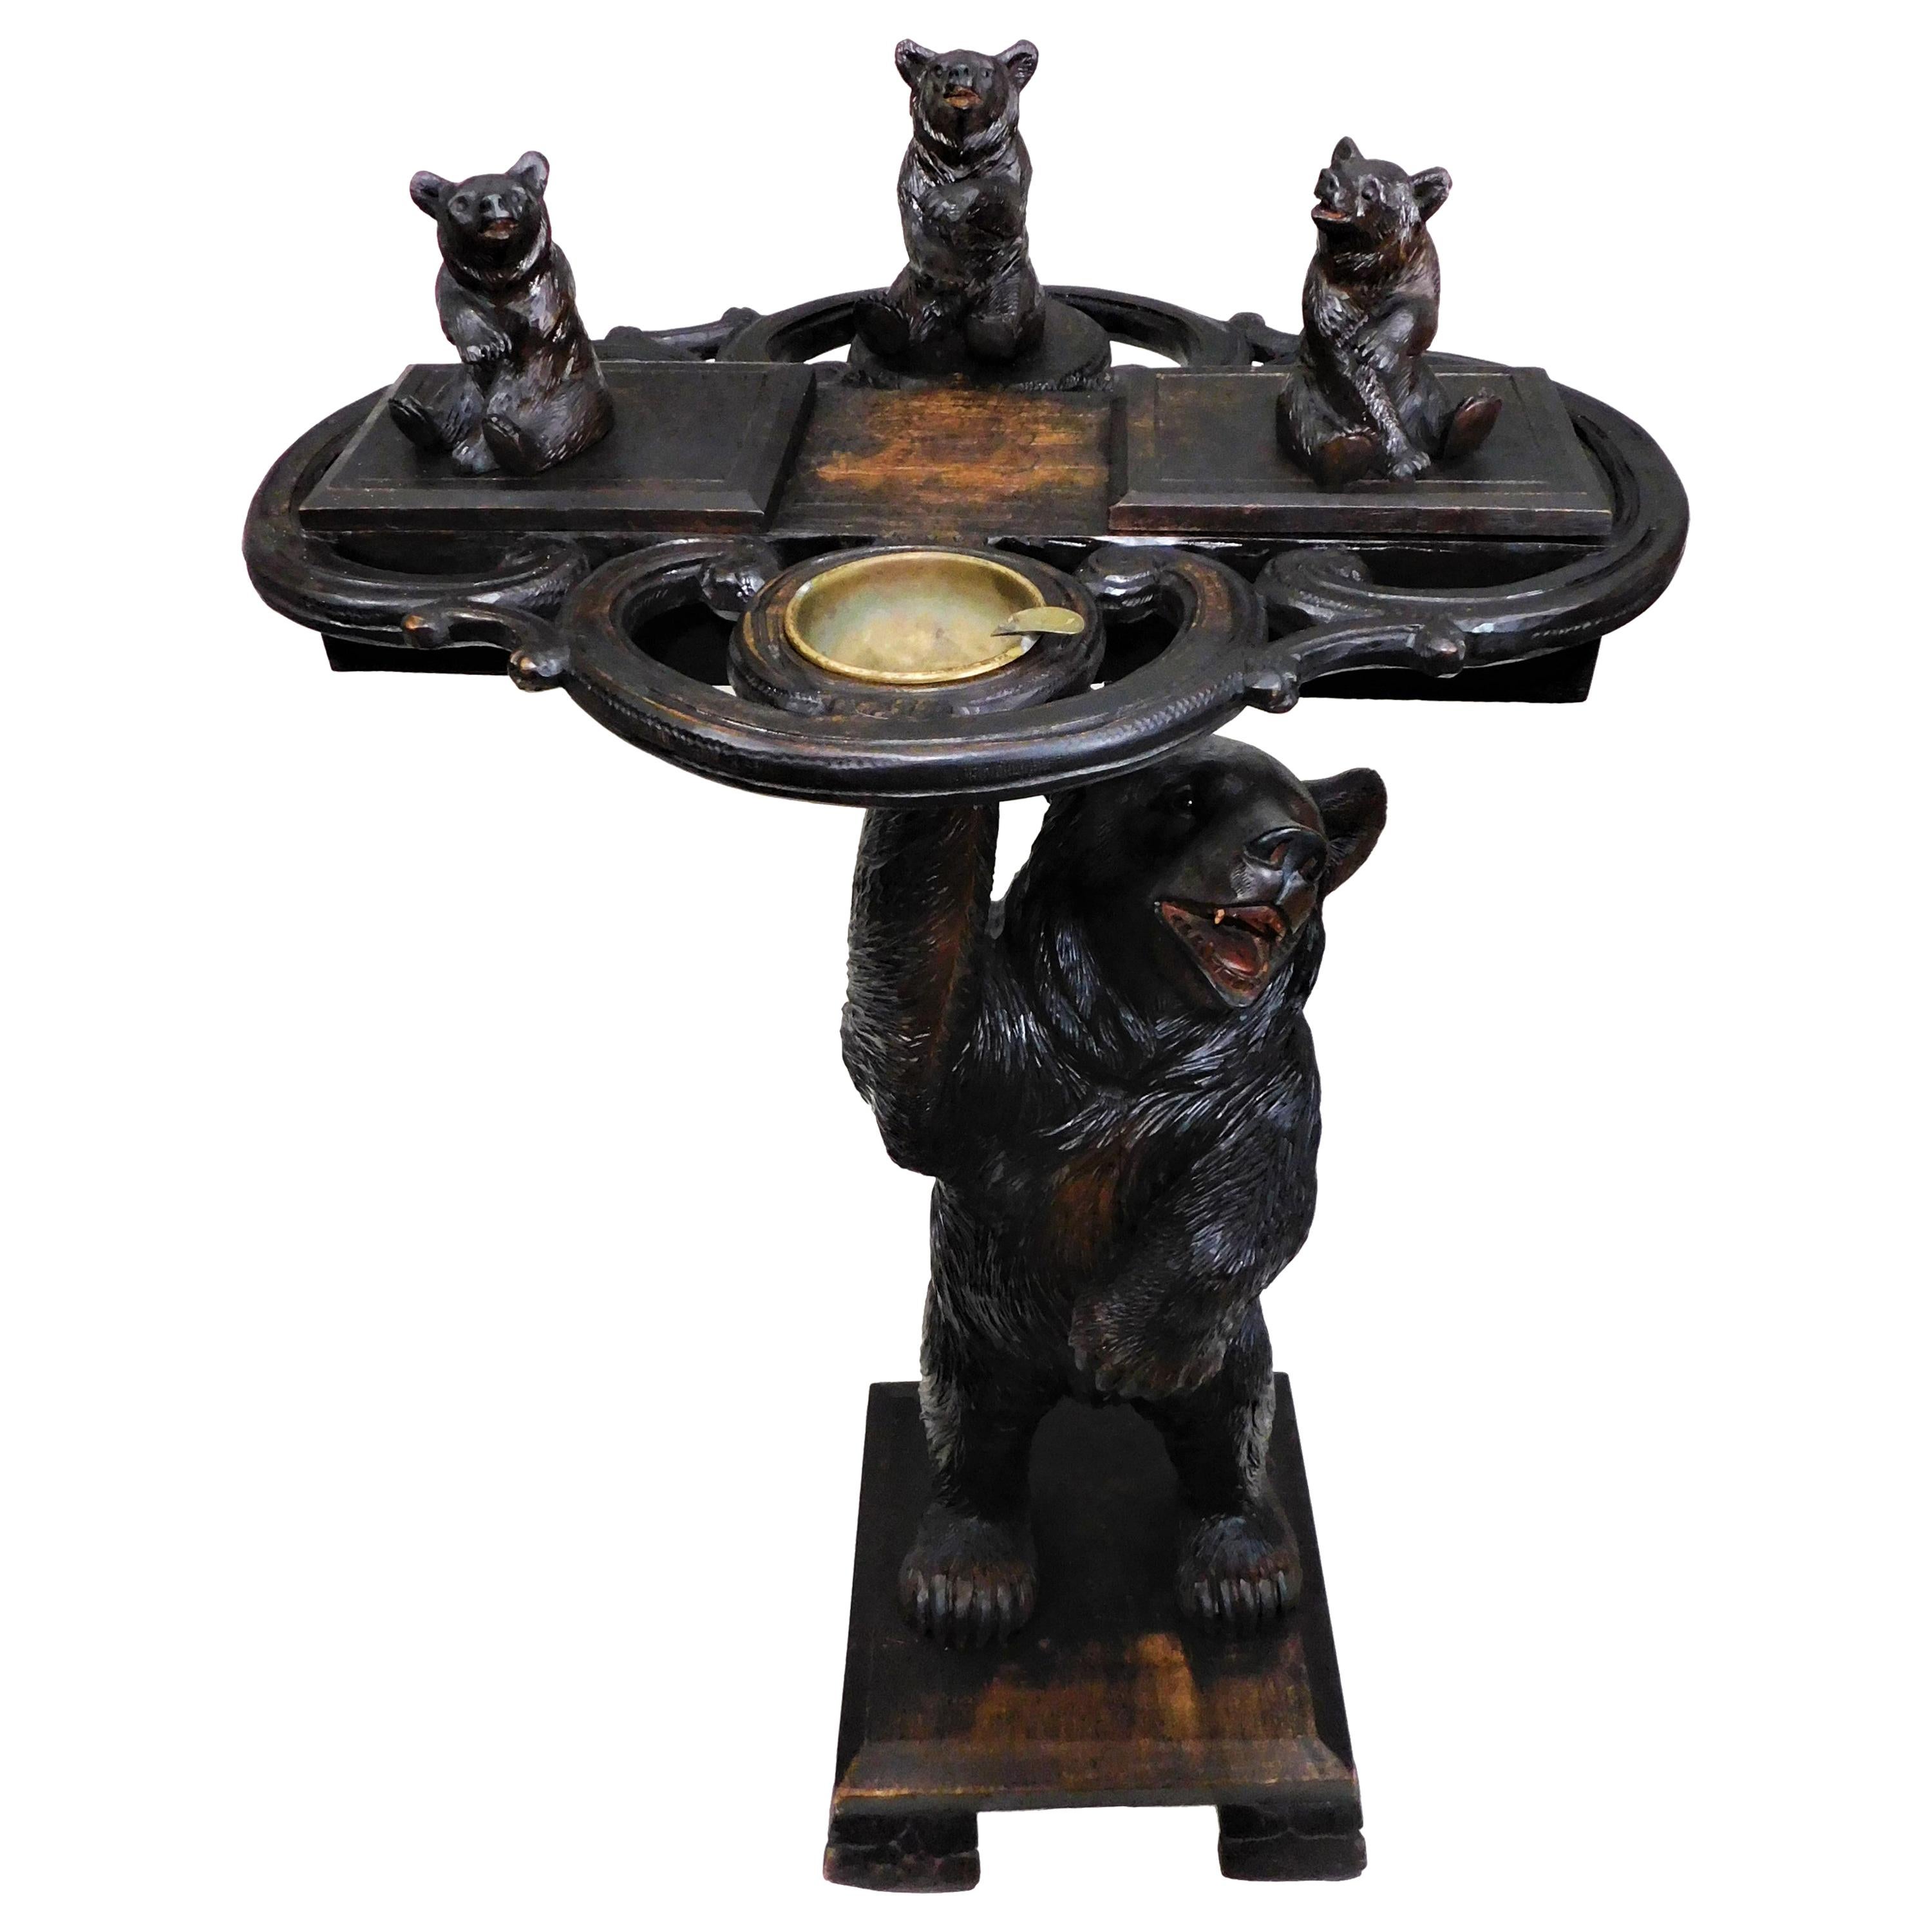 Black Forest Carved Bears Smokers Table Stand with Brass Ashtray, circa 1890s